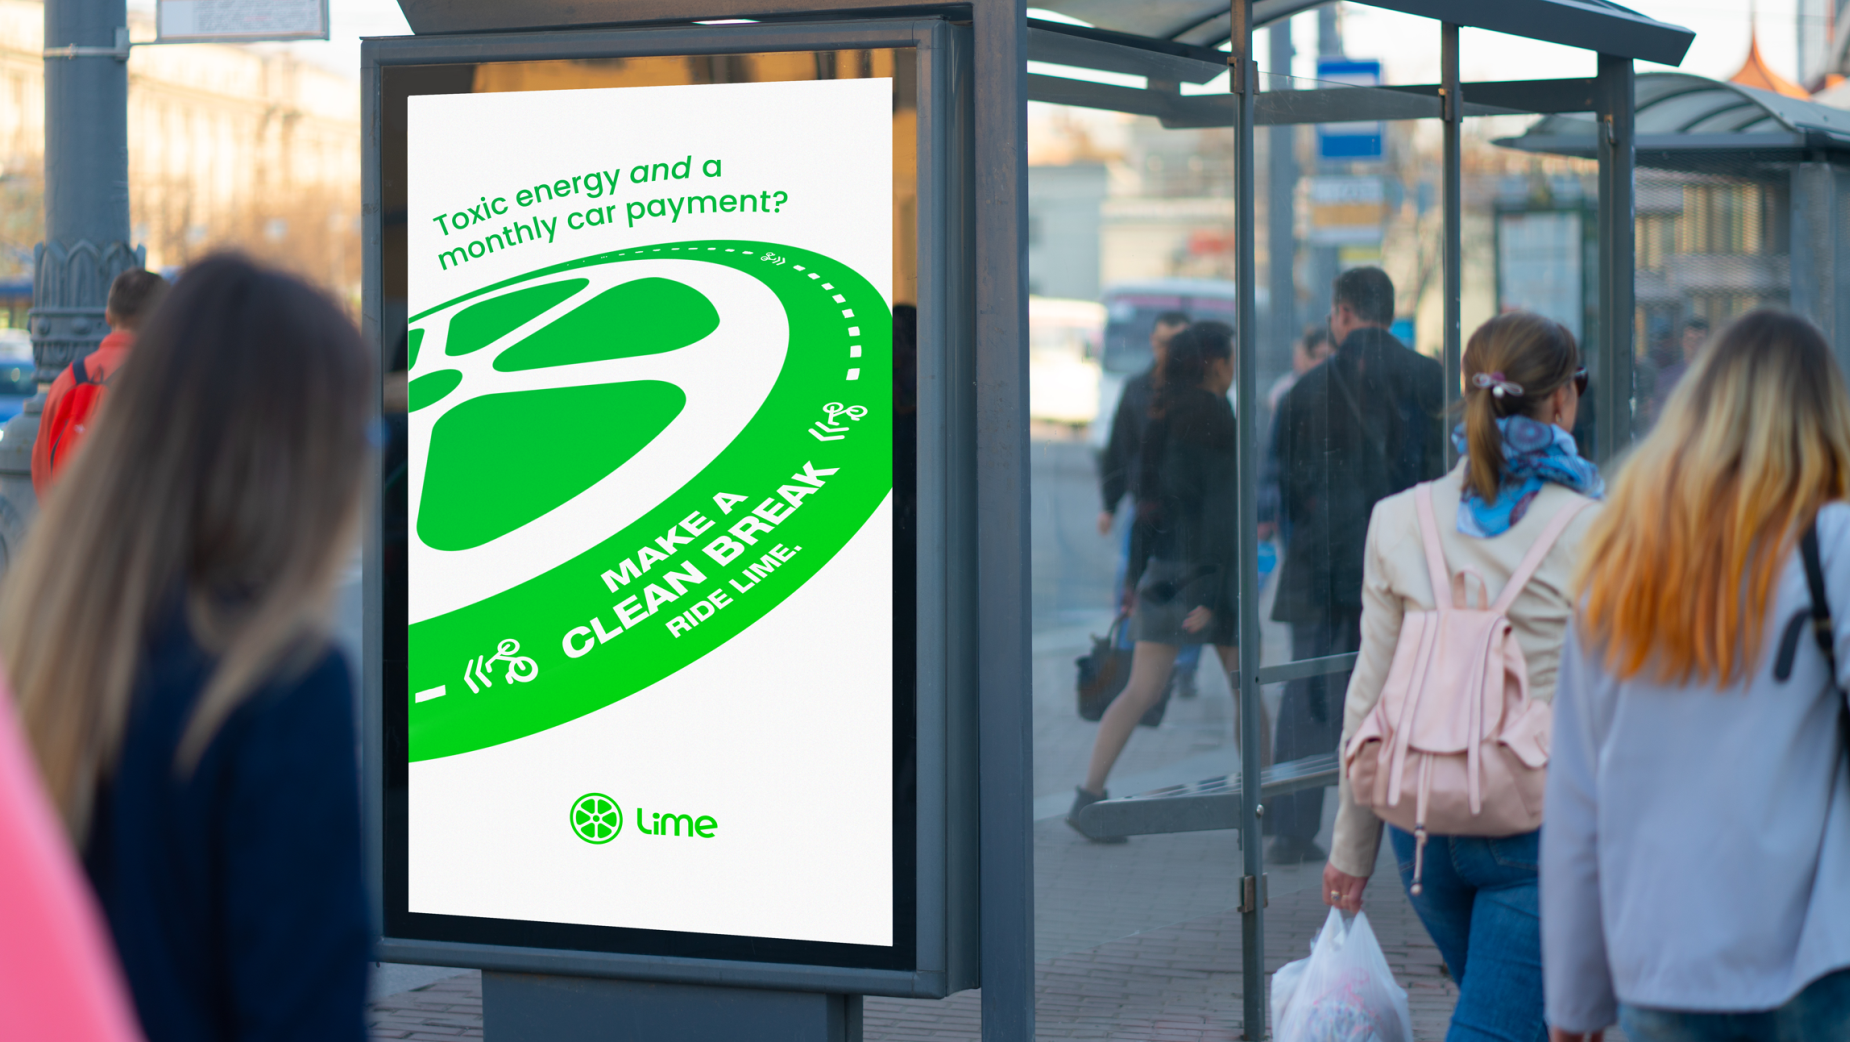 Lime’s Biggest Ever Campaign Suggests a ‘Clean Break’ from Cars 